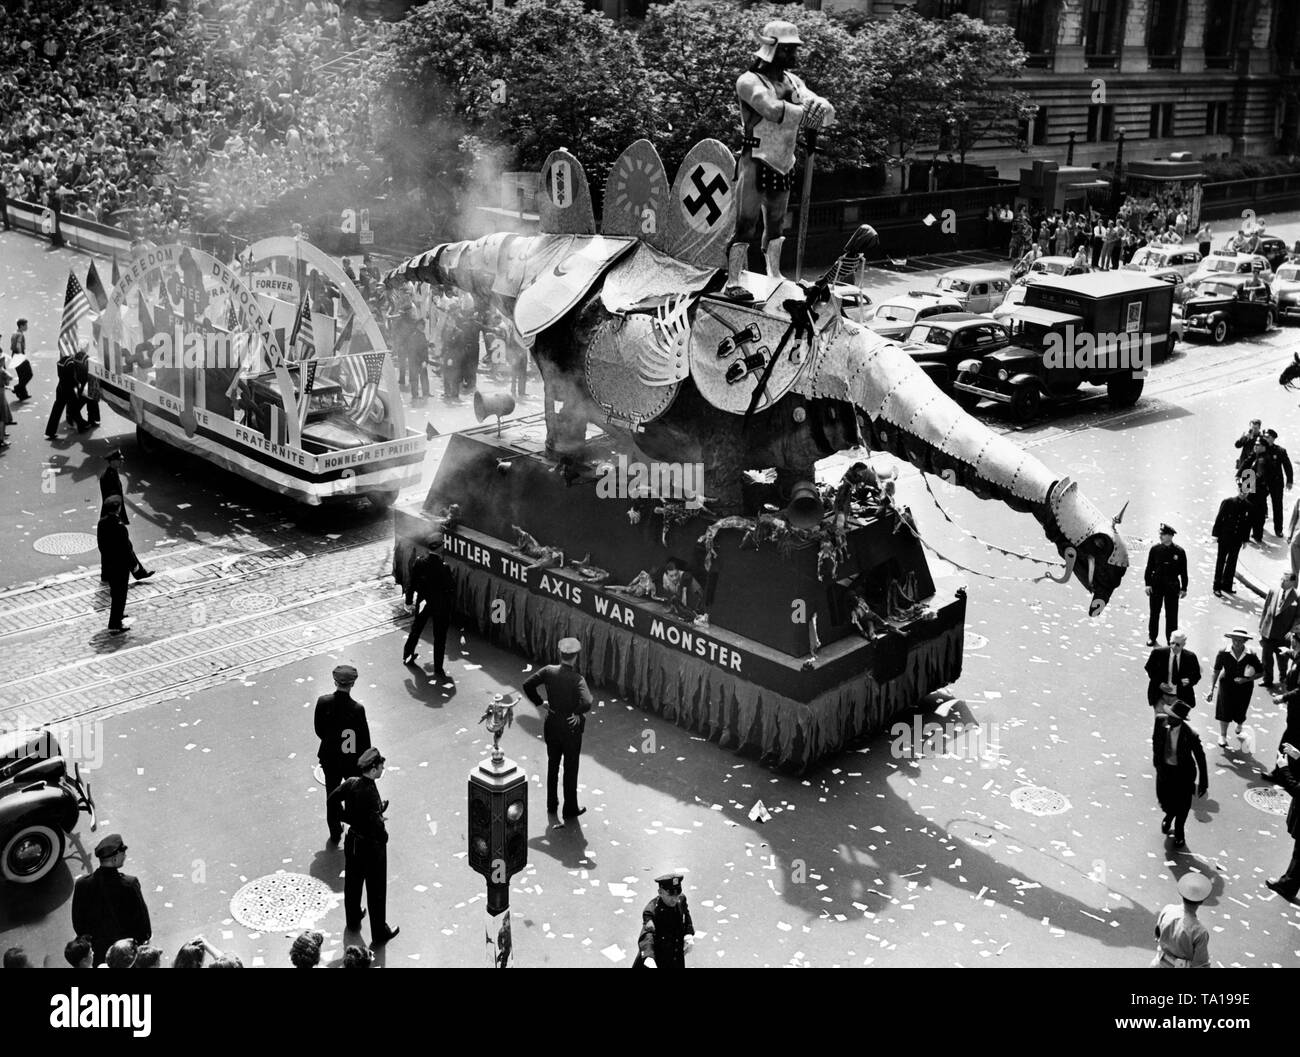 A procession in New York carries along a car on which Hitler is sitting as a man-eating monster with the words 'Hitler the Axis war monster'. Behind, a car that was to stand for the free France. On the car the inscriptions 'Liberte, Egalite, Fraternite, Honneur et Patrie' and 'Freedom, Democracy, Free France Forever'. Next to the swastika, the symbol of Japan (the rising sun) and the fasces standing for the fascist Italy. Stock Photo